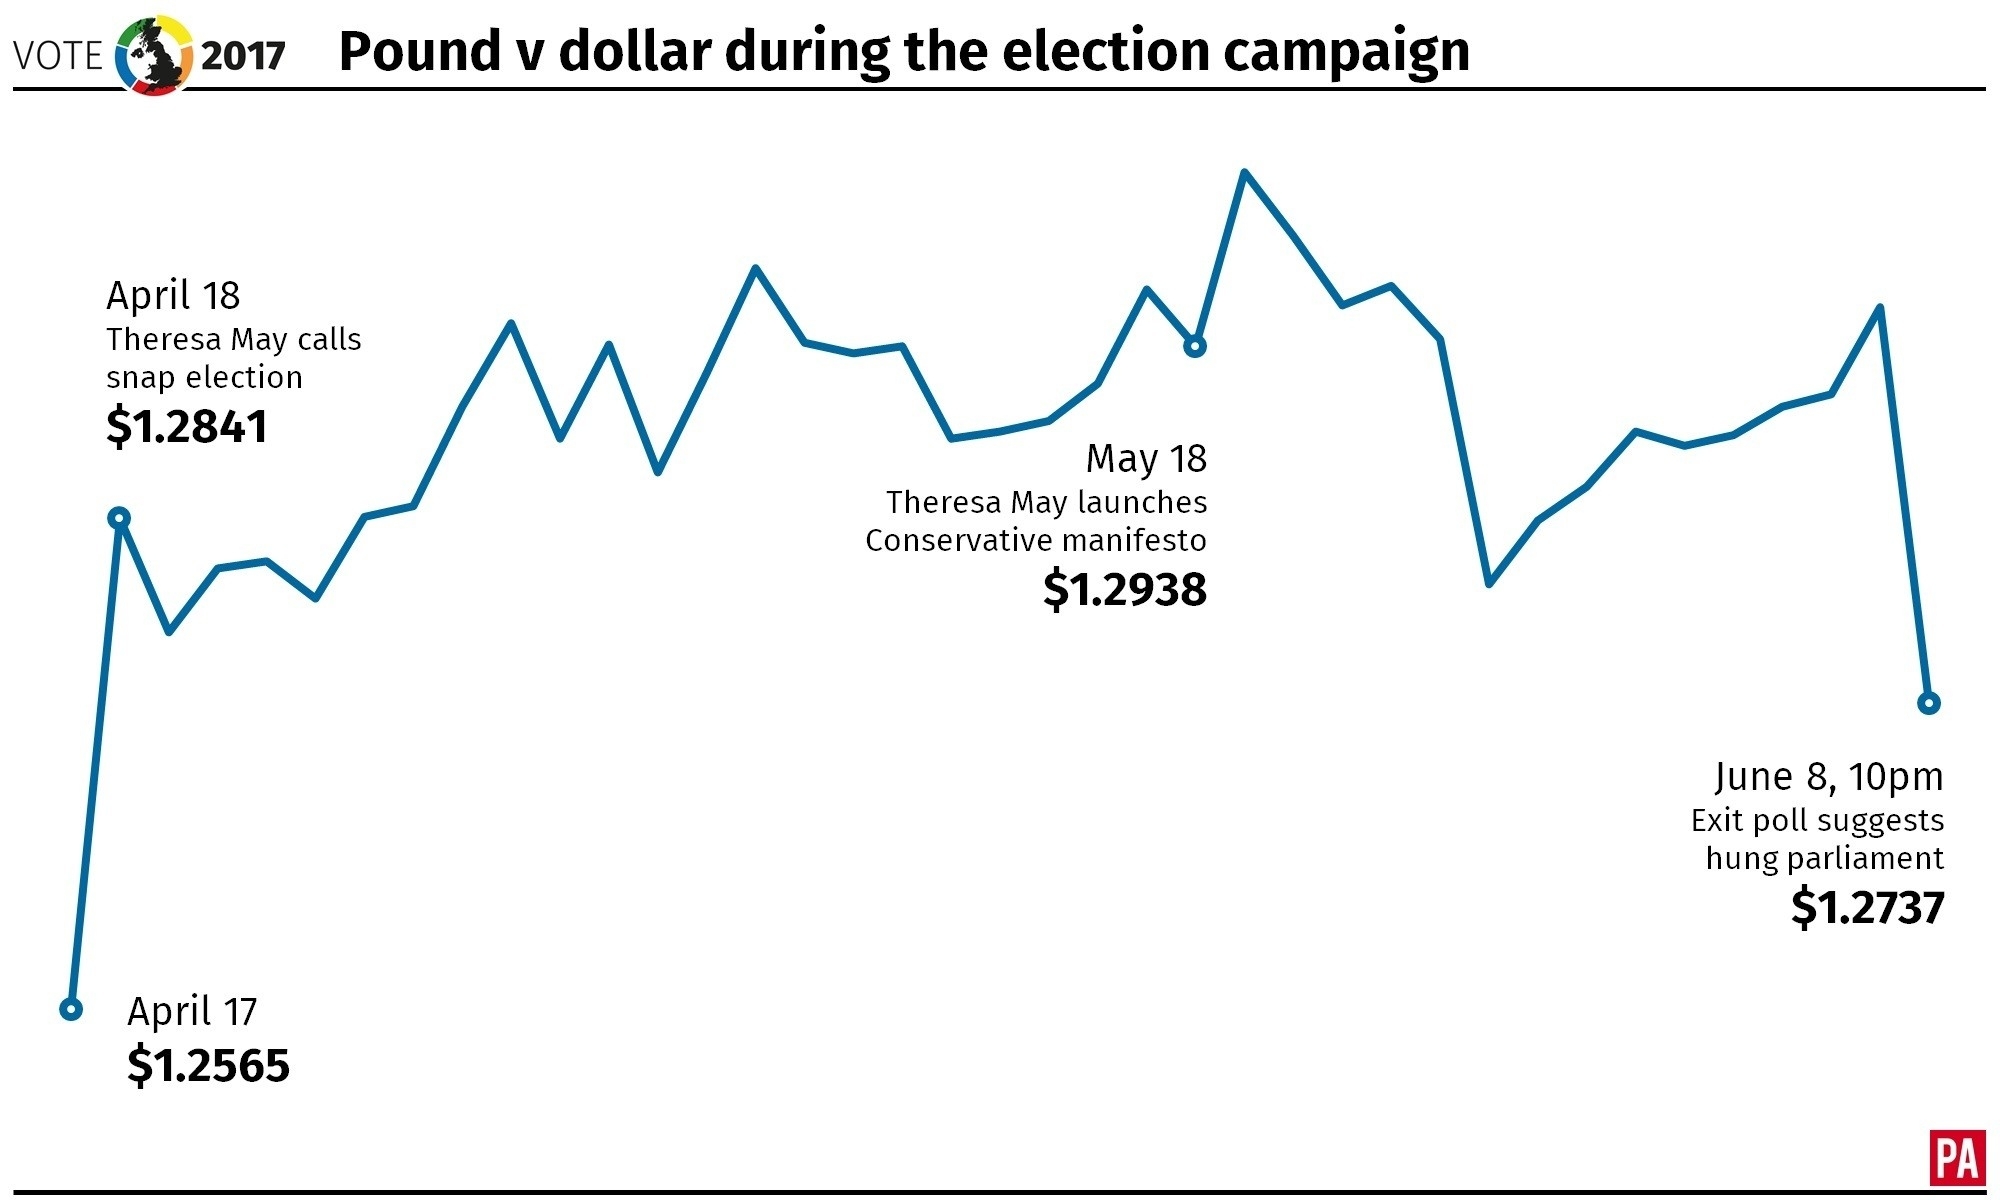 How the pound fared against the dollar during the election campaign. 